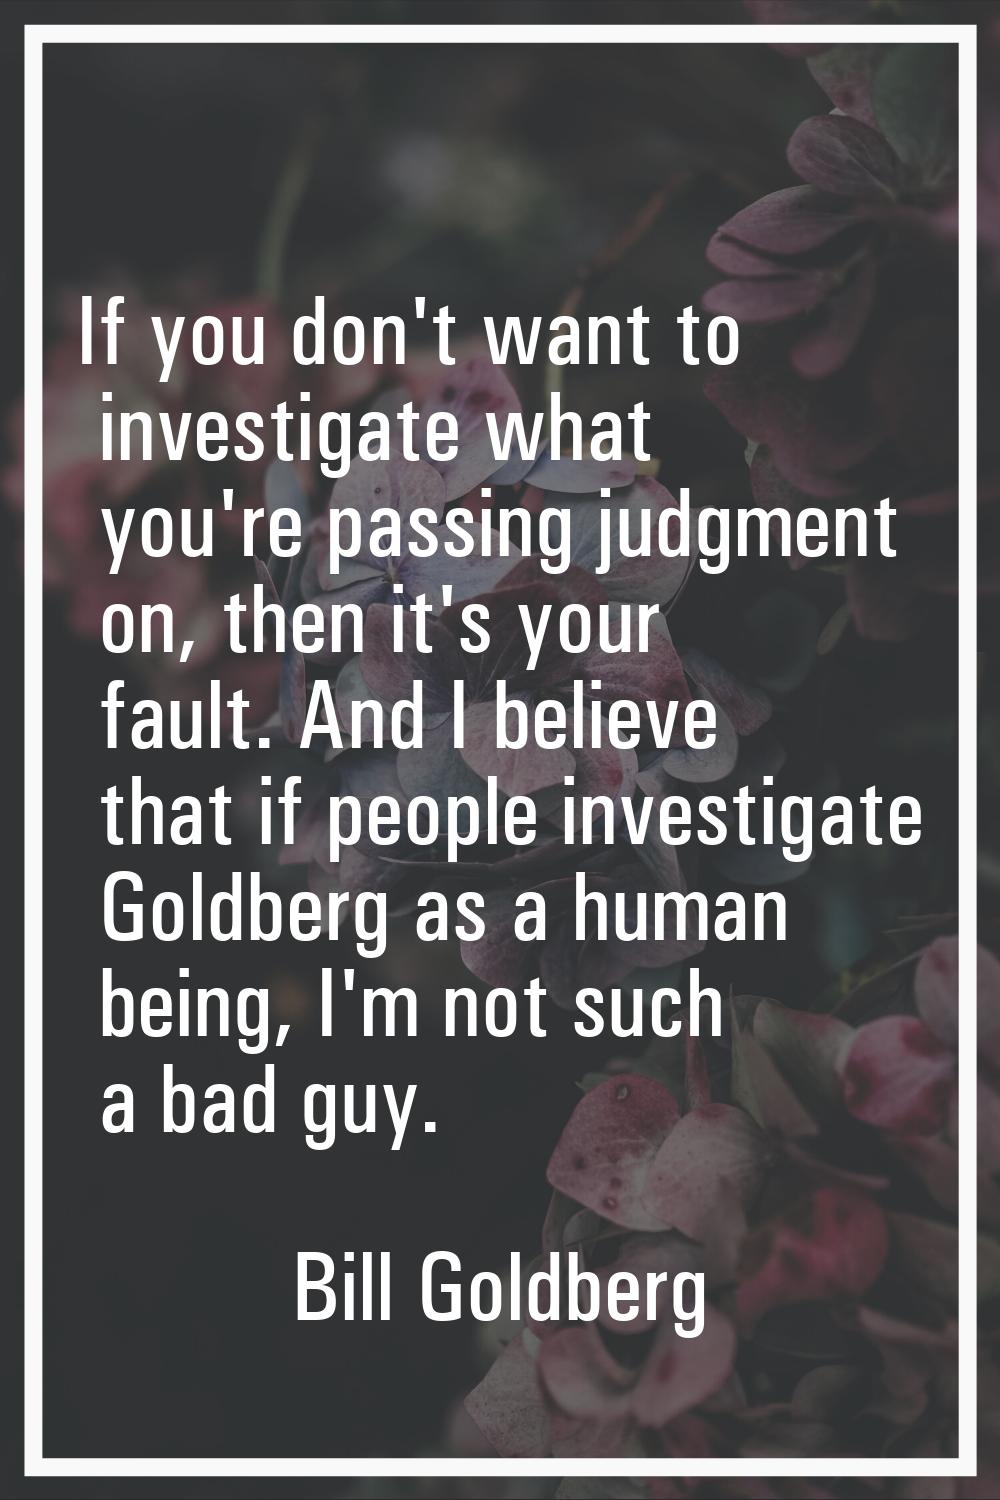 If you don't want to investigate what you're passing judgment on, then it's your fault. And I belie